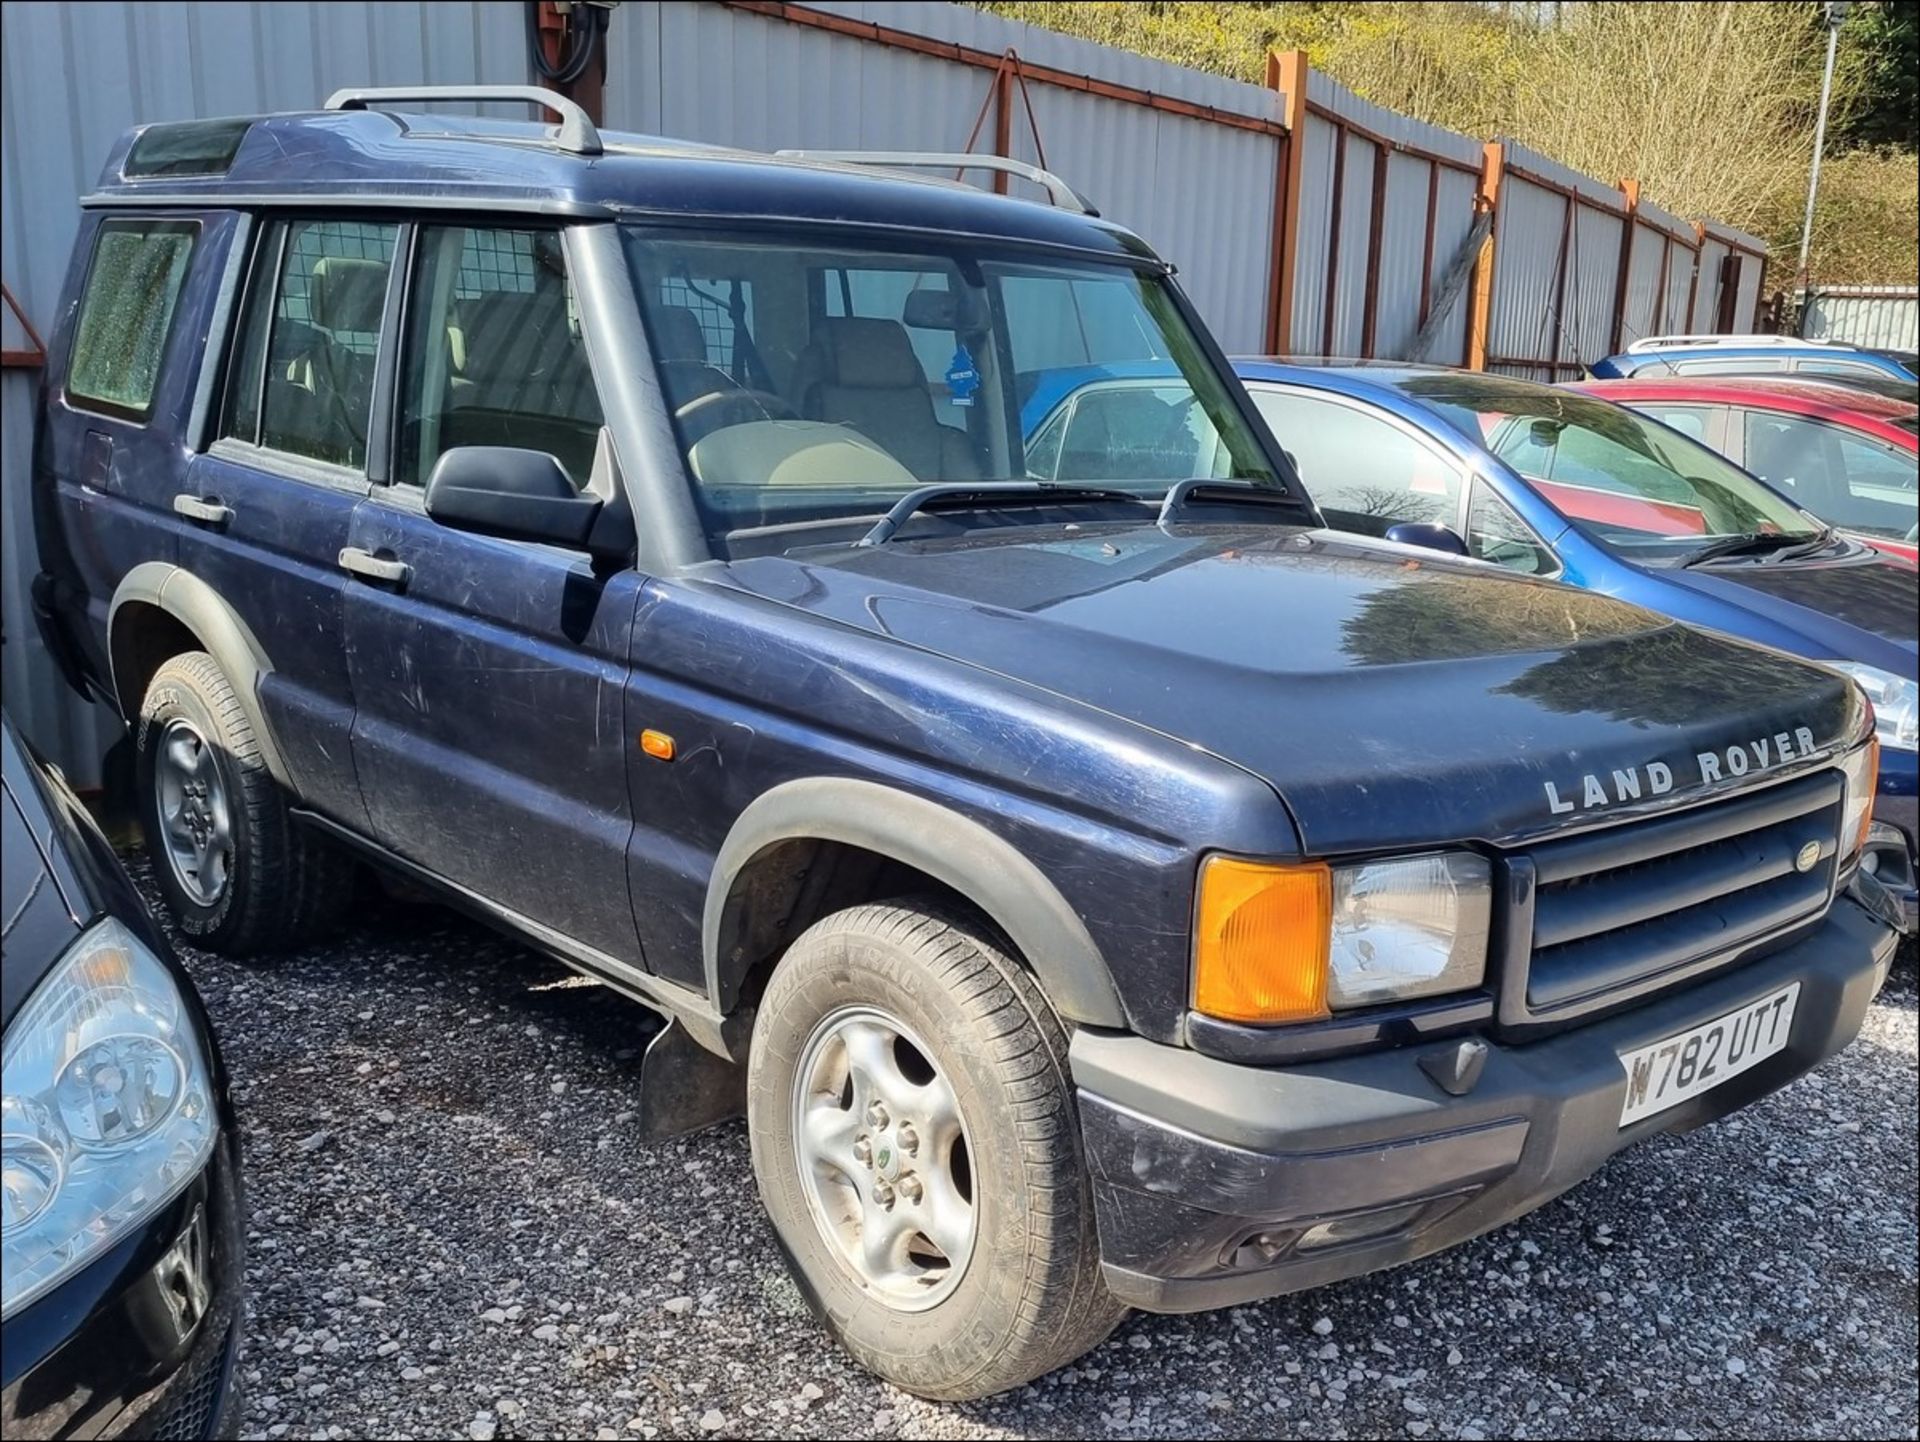 2000 LAND ROVER DISCOVERY - 2500cc 5dr Estate (Blue) - Image 2 of 23